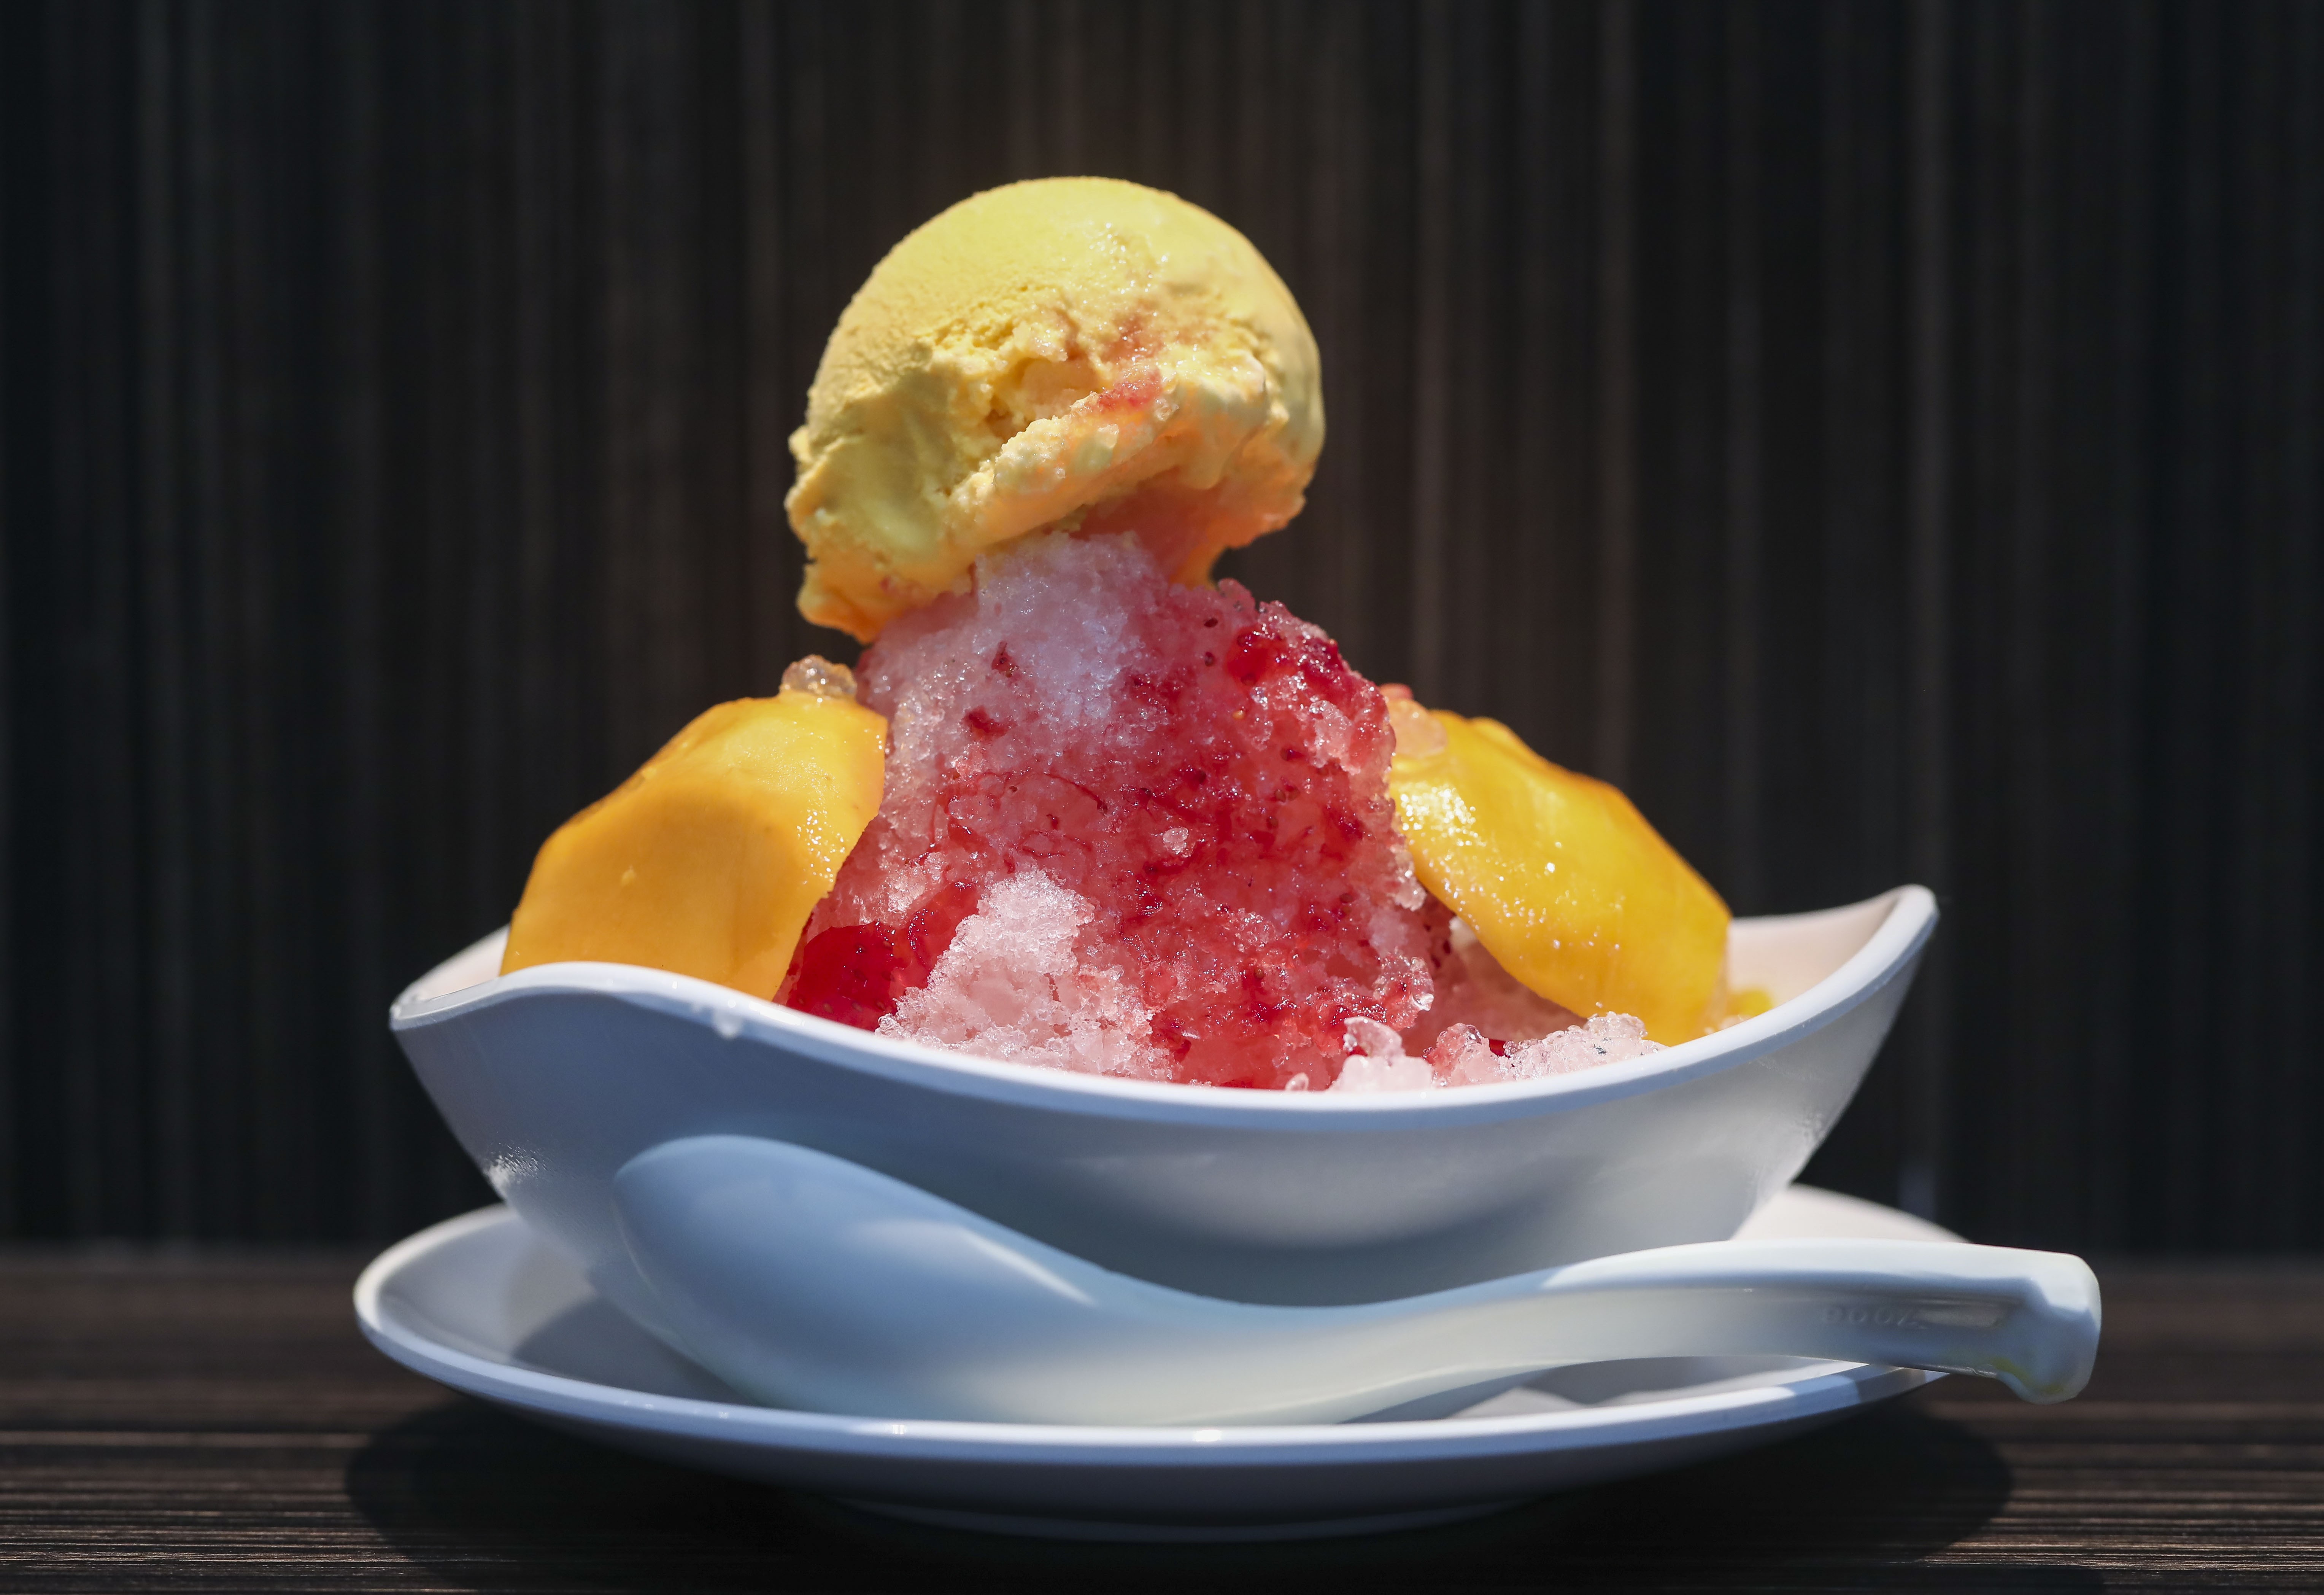 Mango shaved ice cream, fruit-flavoured shaved ice imported from Japan, fruity milk shake custard, liquid nitrogen ice cream – where to go for some of ht best cooling treats as summer gets hotter and stickier